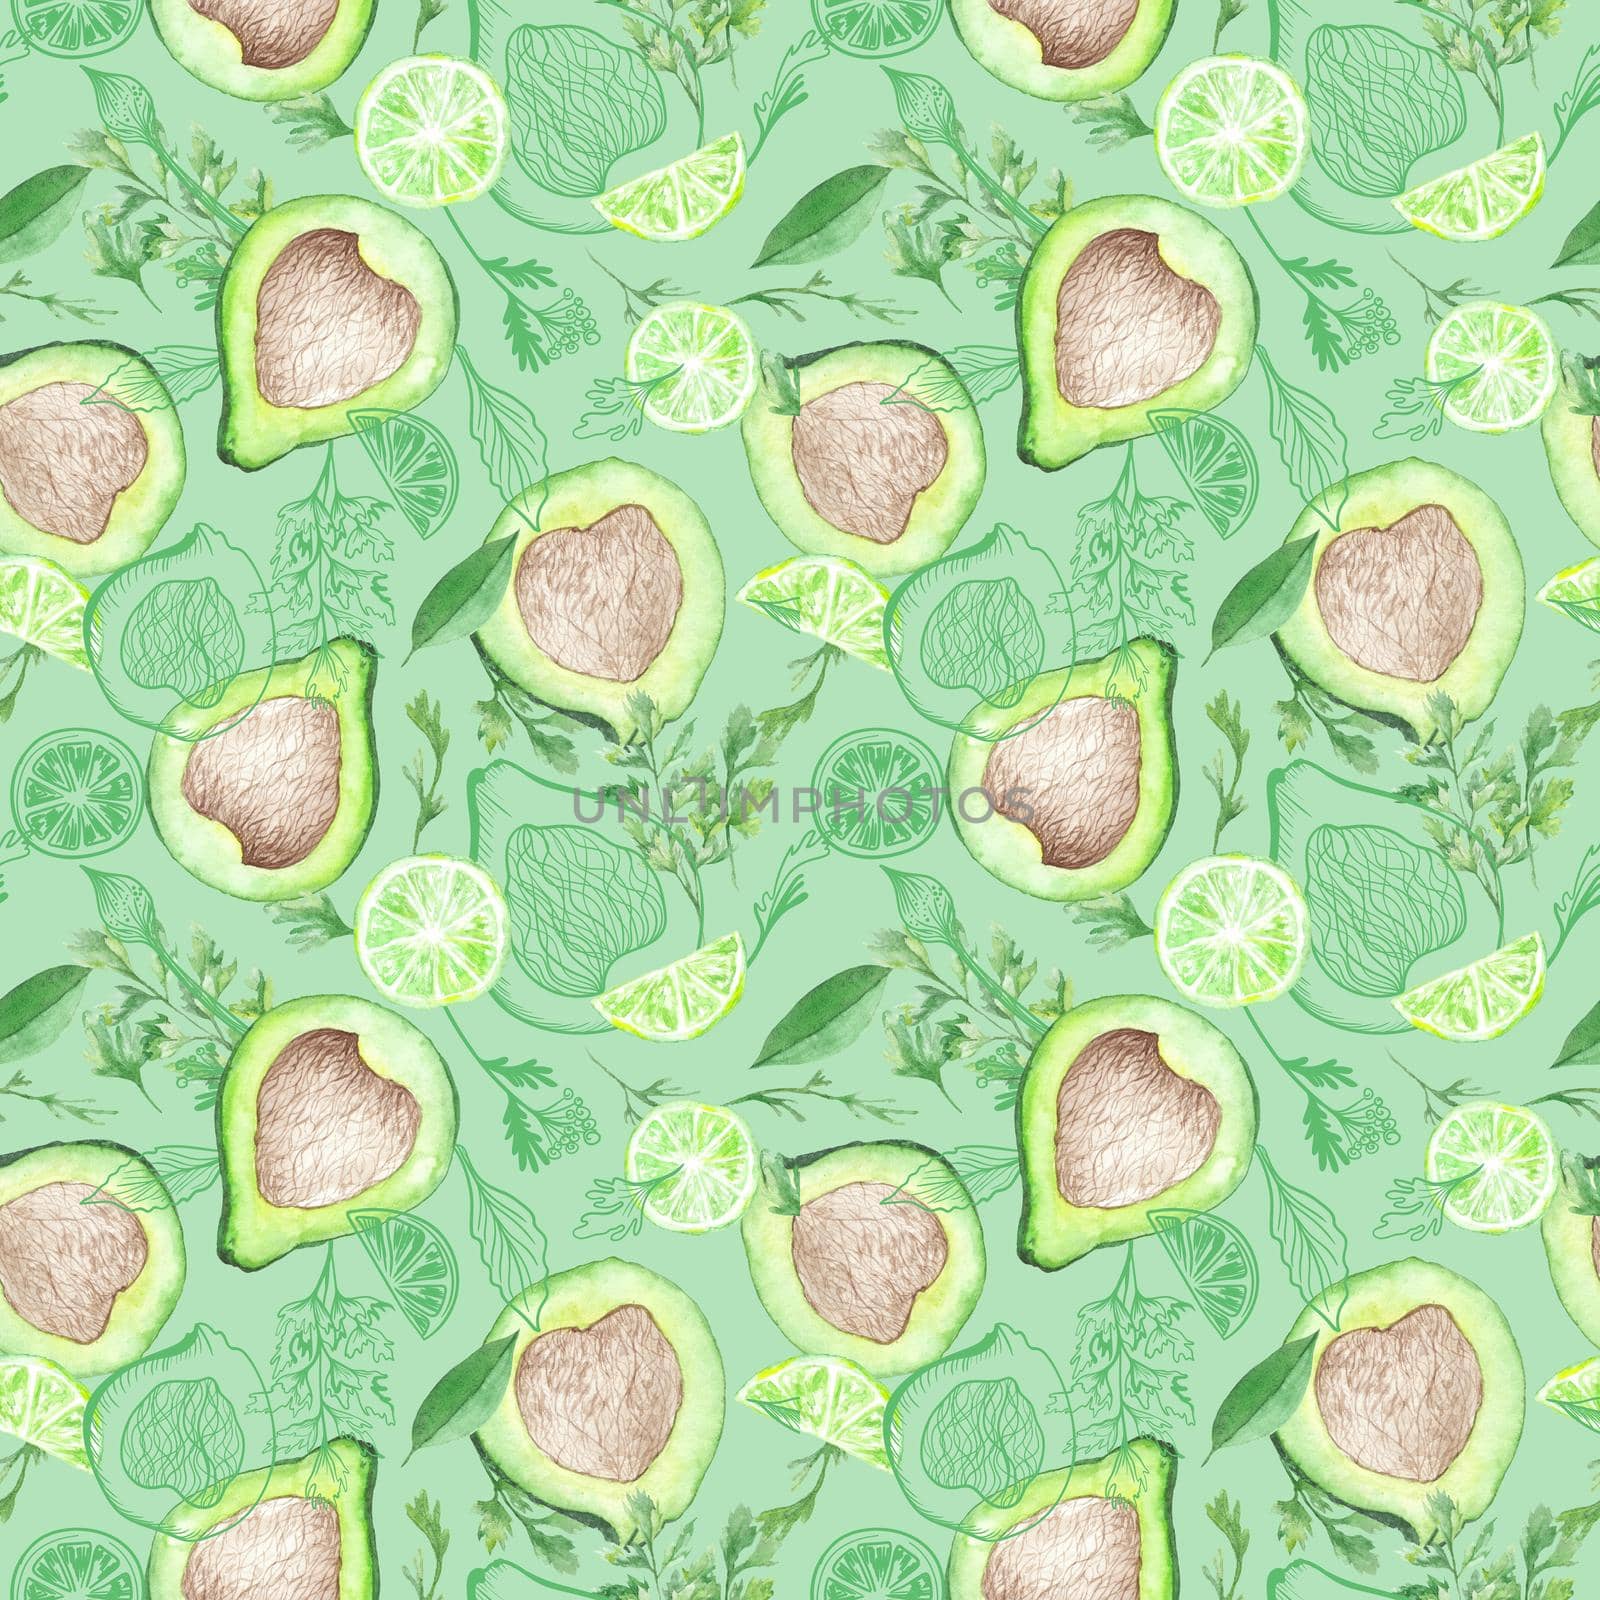 Healthy eat superfood hand painted background with avocado, lime and herbs